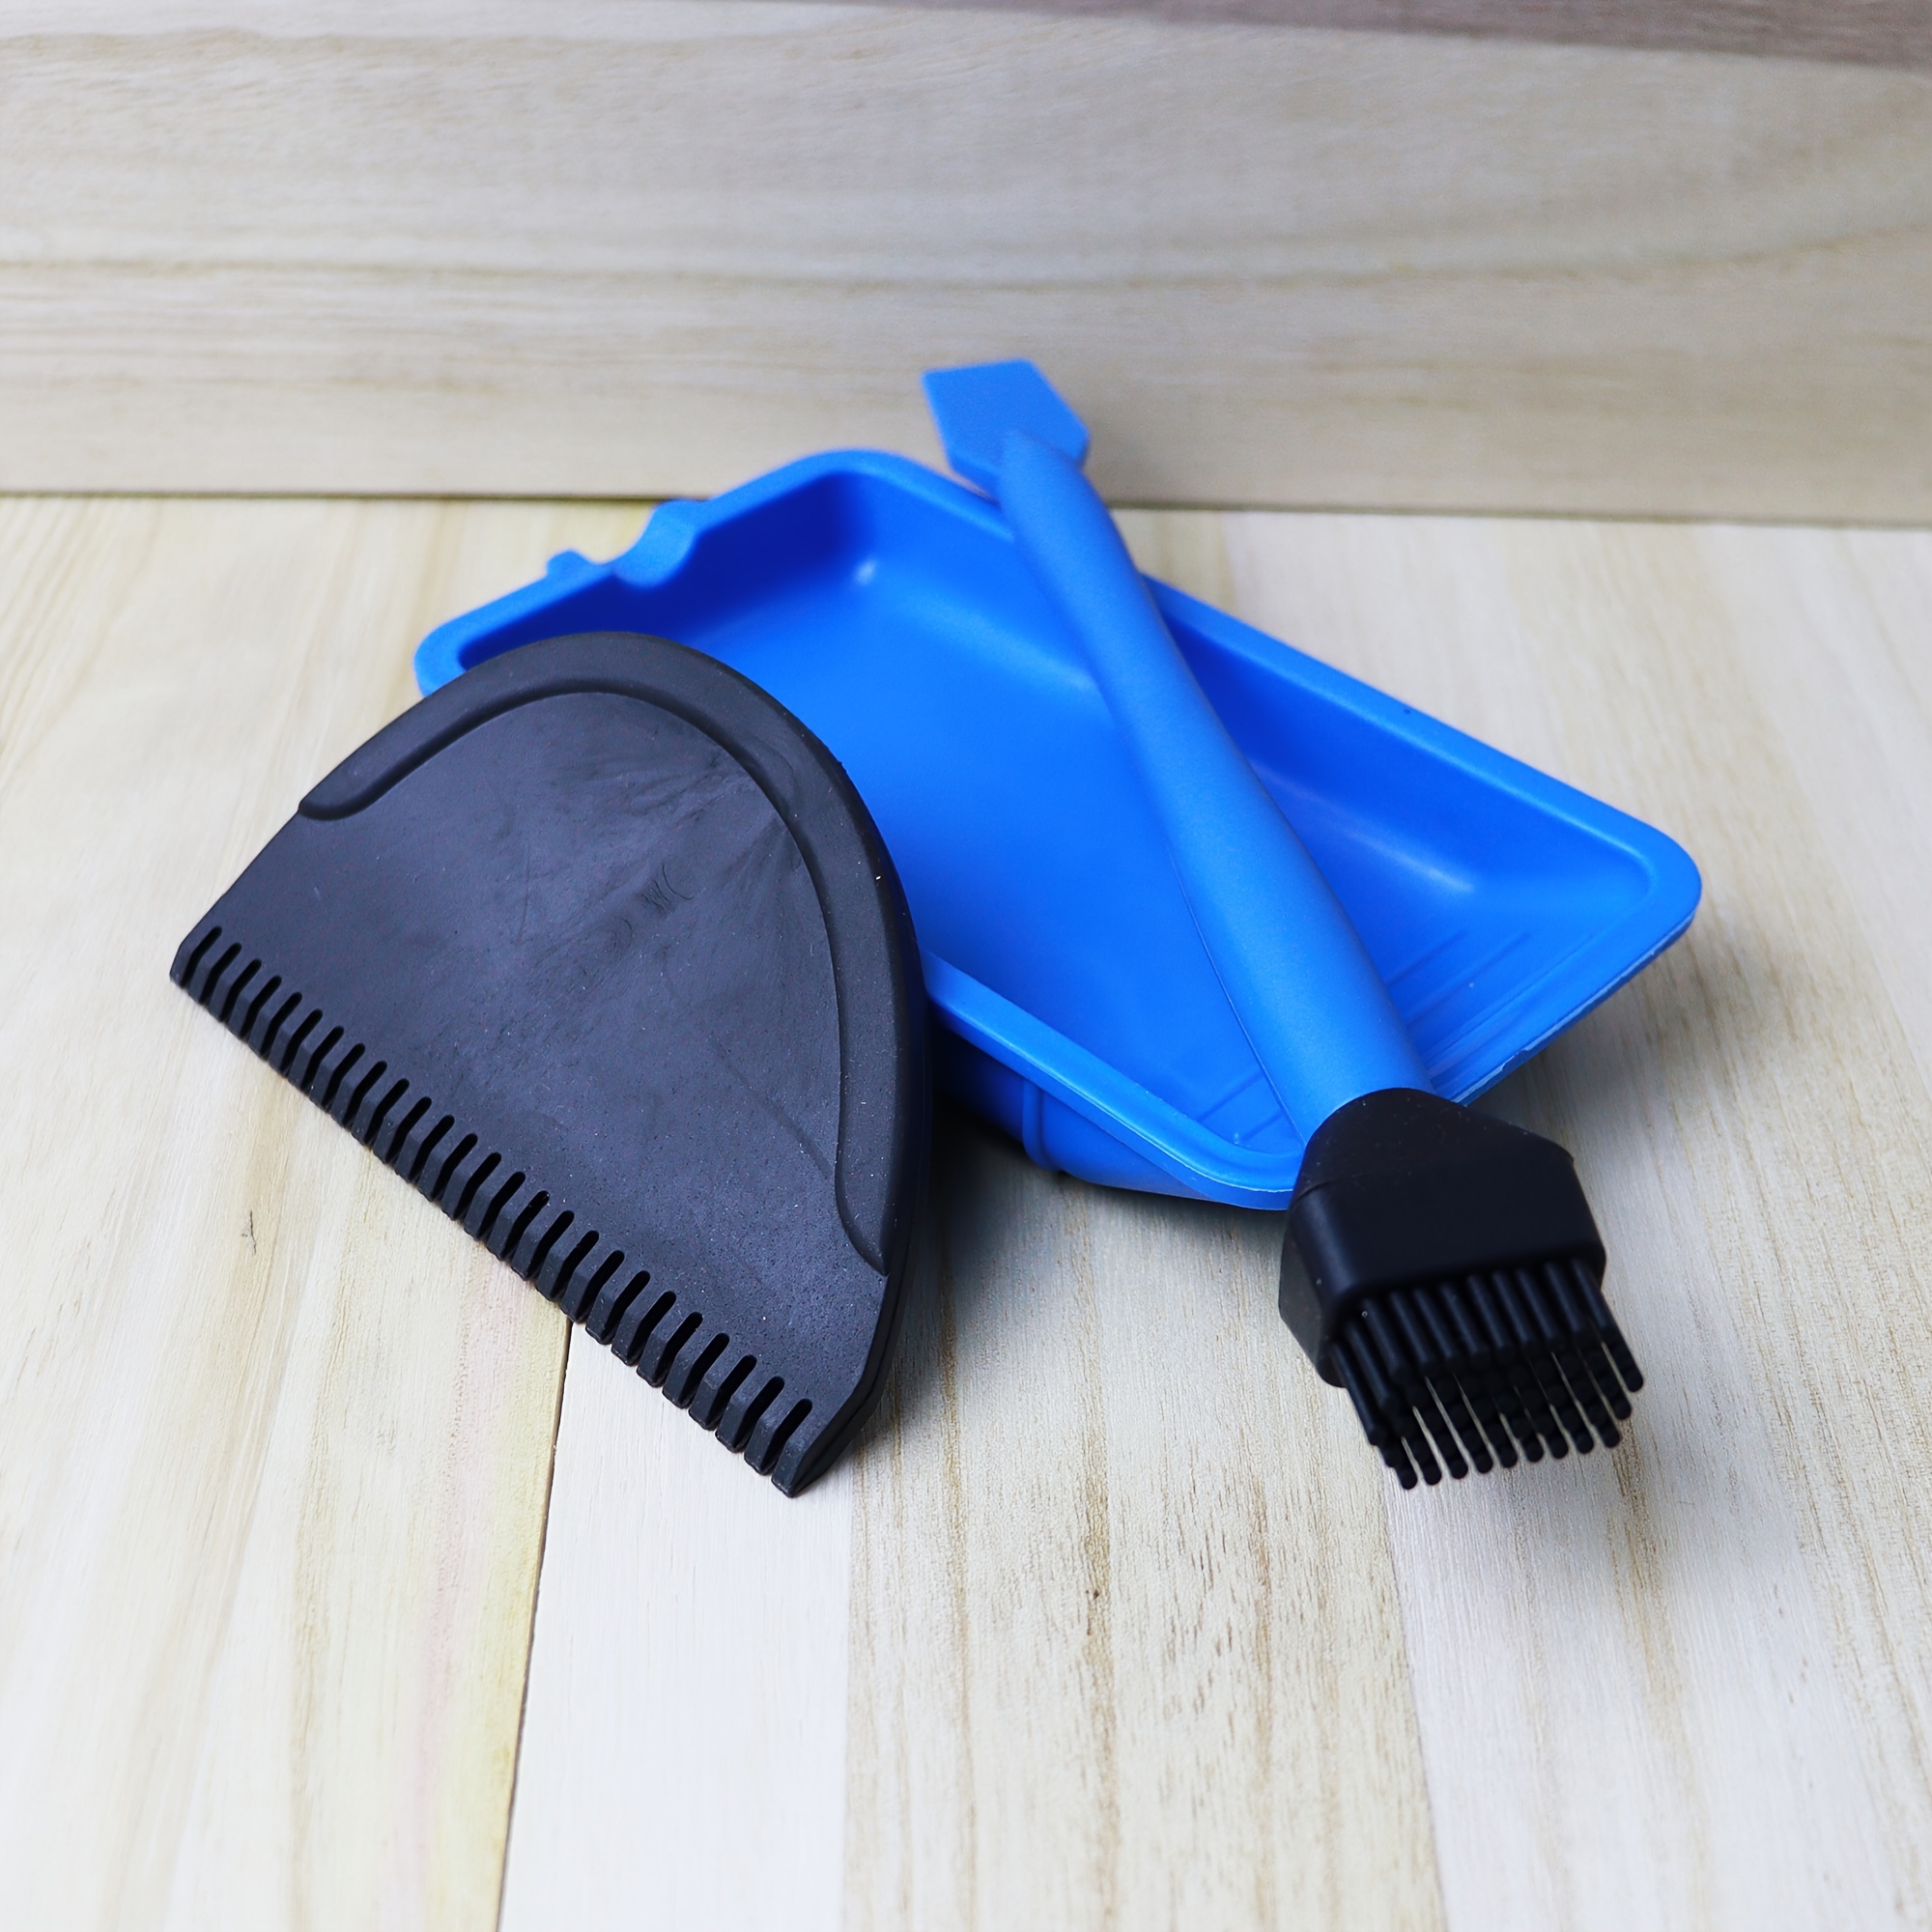 Complete Silicone Glue Kit Polypropylene Comb Brushes Spreader Applicator  Tray Woodworking Glue Brush Brush Glue Brush Brush White Glue Brush Set